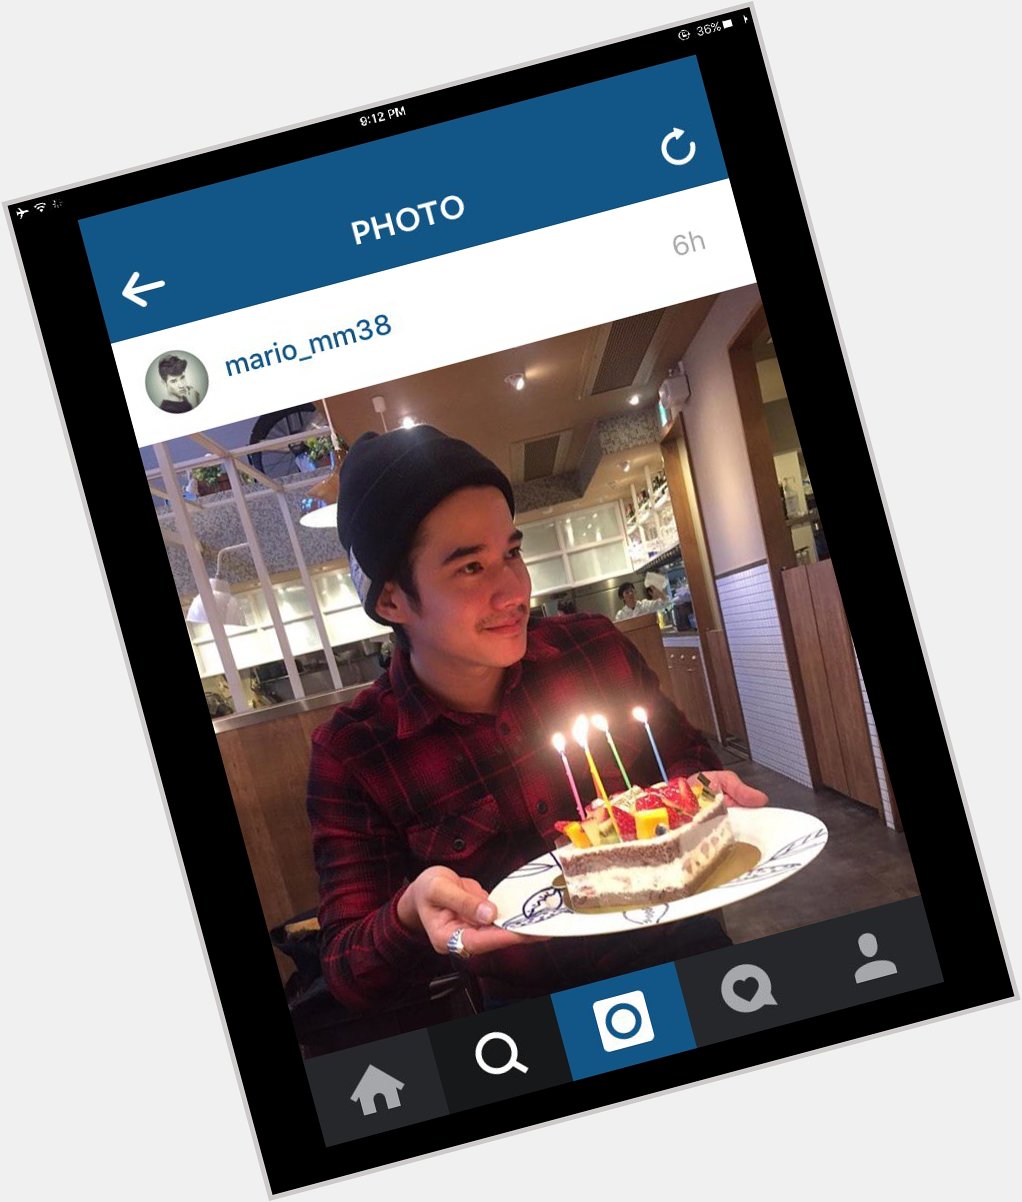 I\m so happy to have the same birthday as MARIO MAURER          